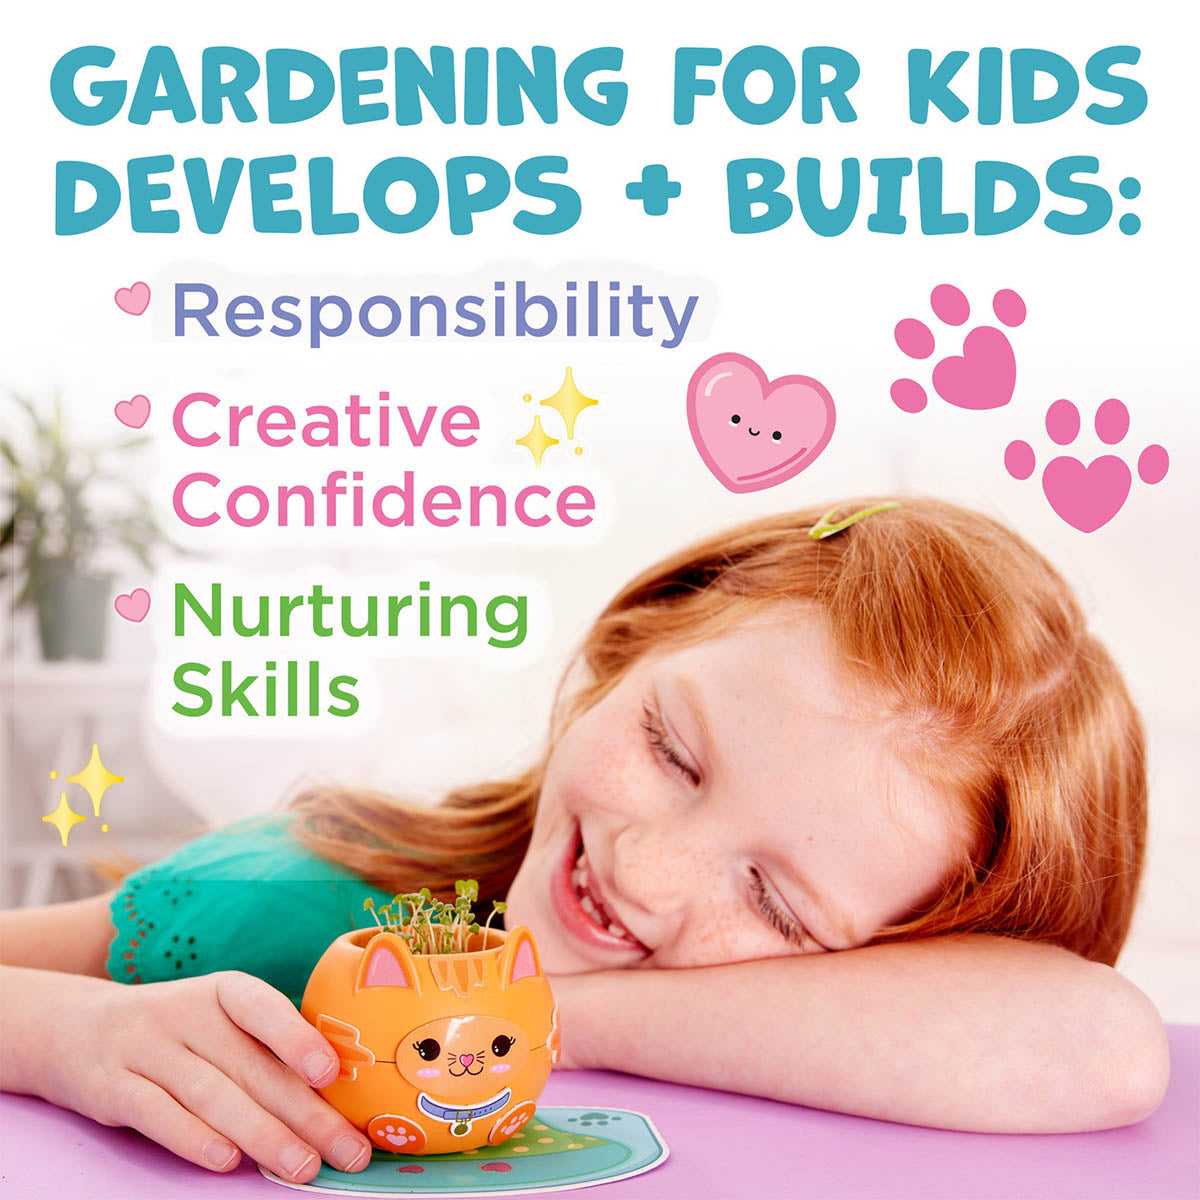 Young girl having fun with Plant-a-Pet Kitty chia garden kit by Creativity for Kids.